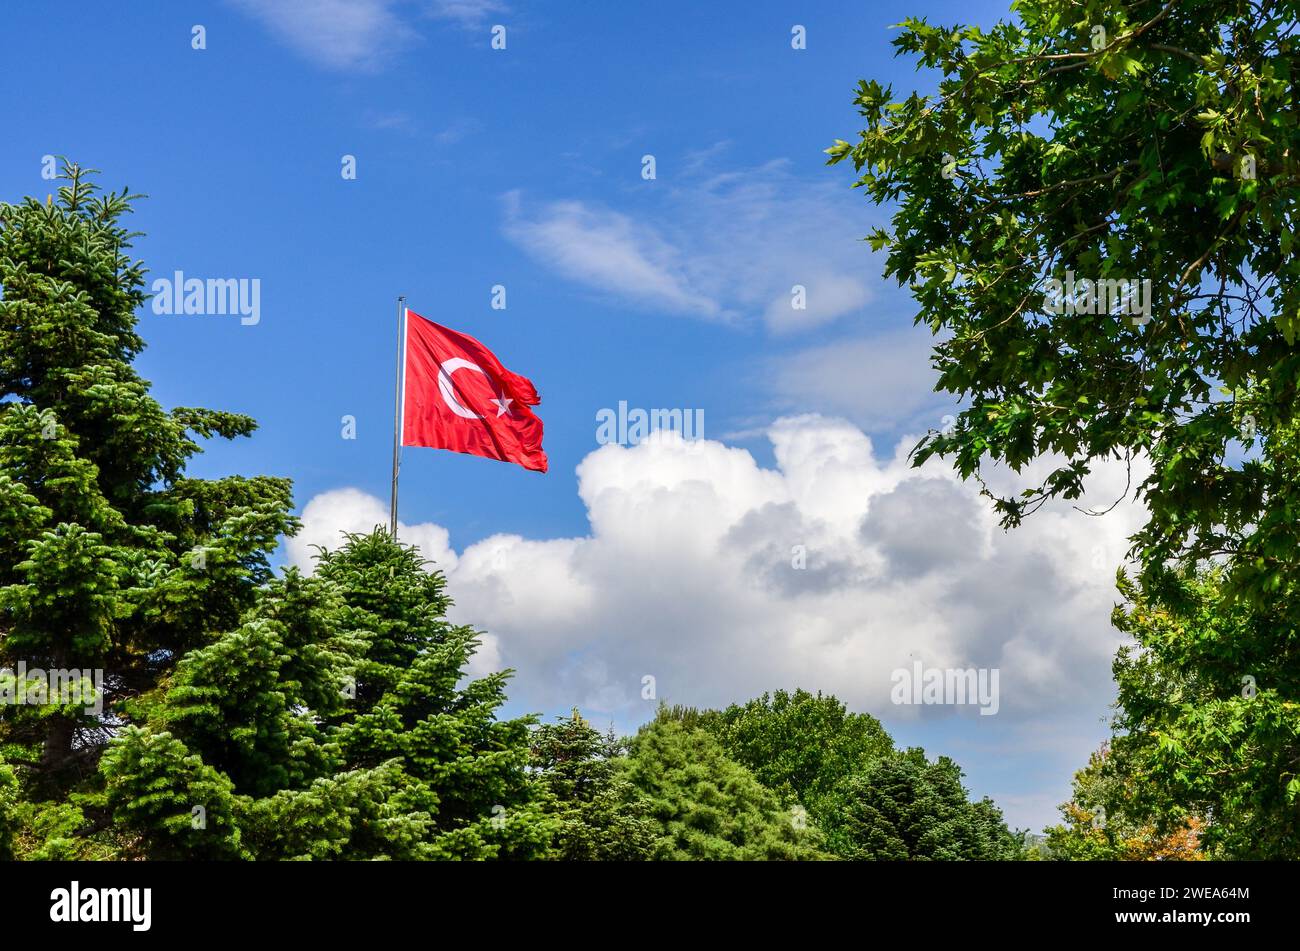 Turkish flag waving in the wind against a blue sky with clouds, surrounded by green lush trees Stock Photo